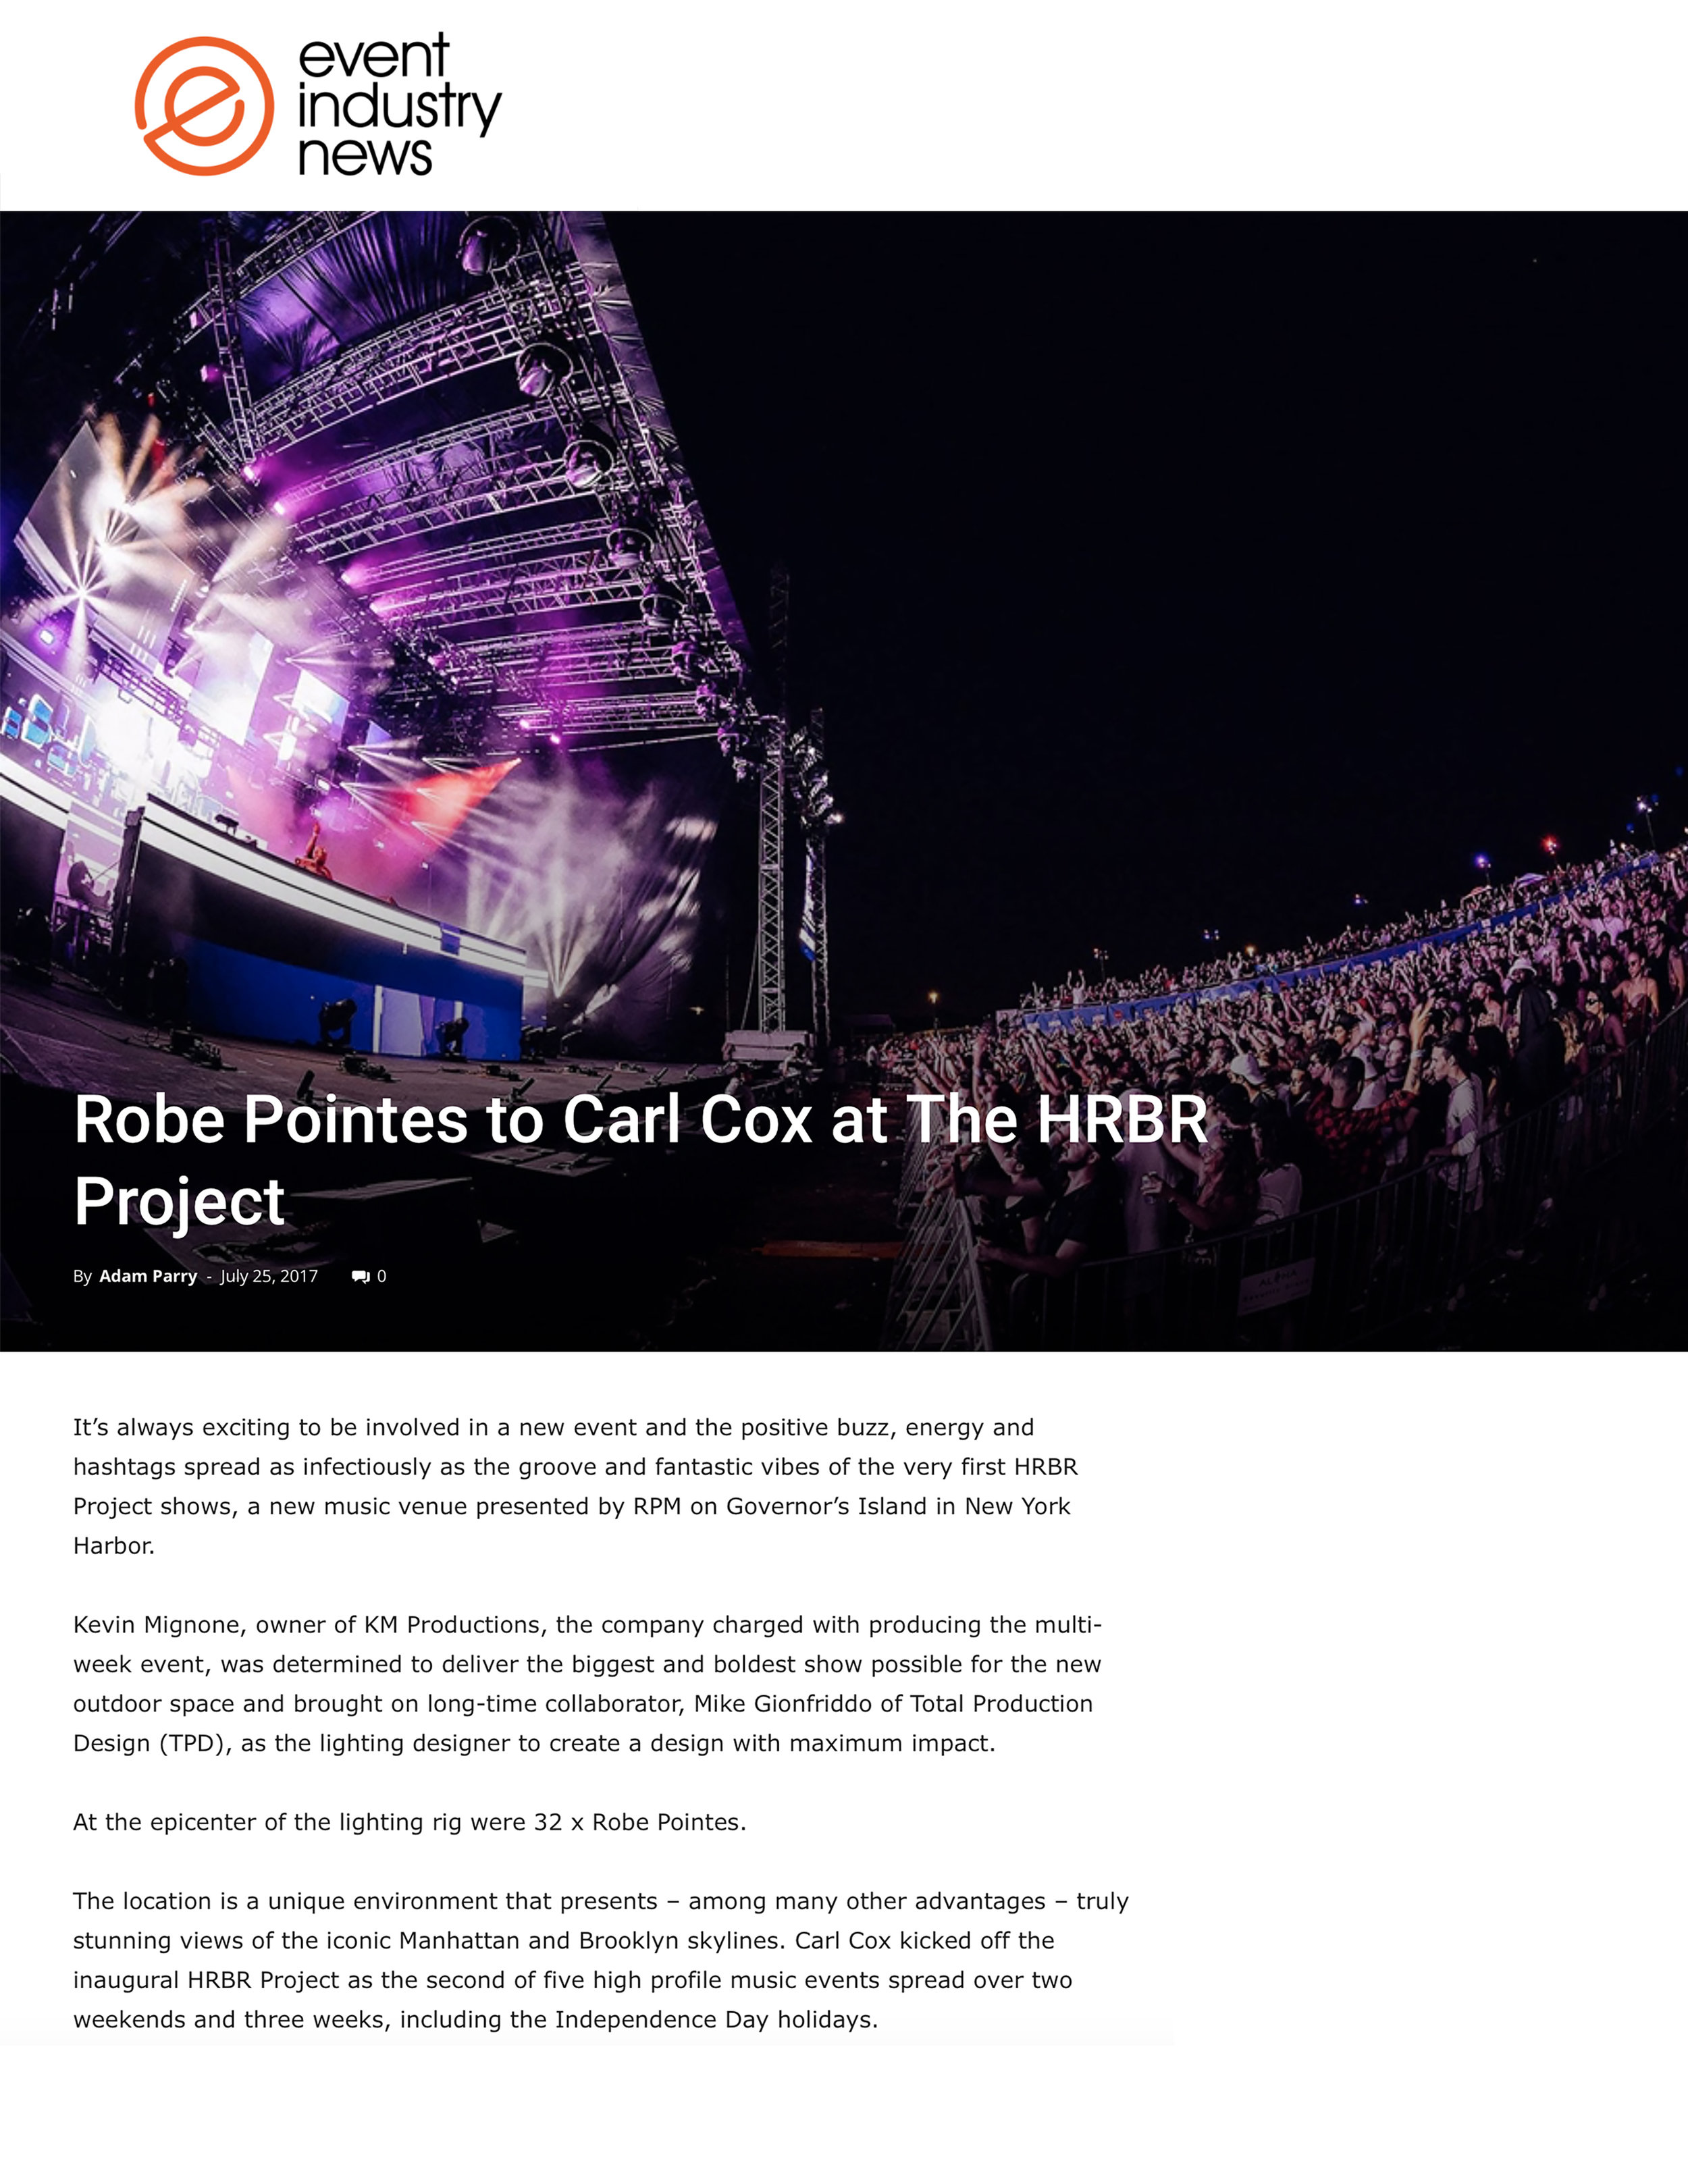 EVENT INDUSTRY NEWS